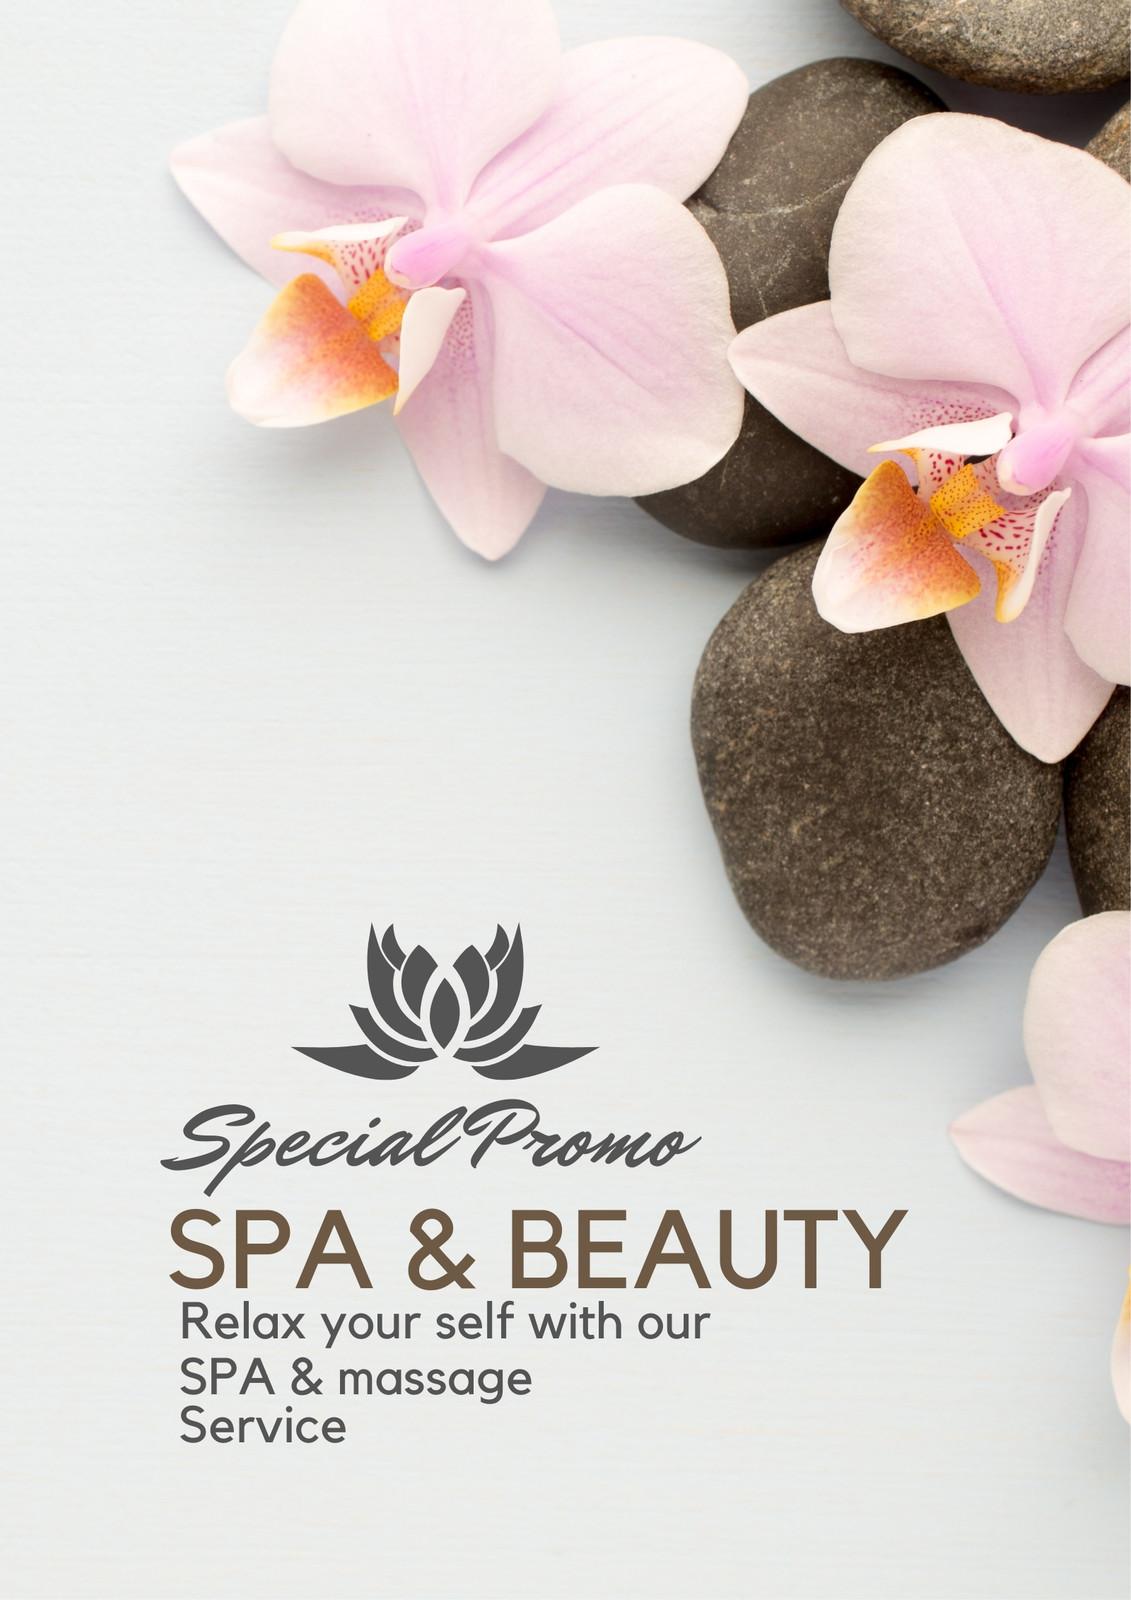 Page 18 - Free and customizable spa templates